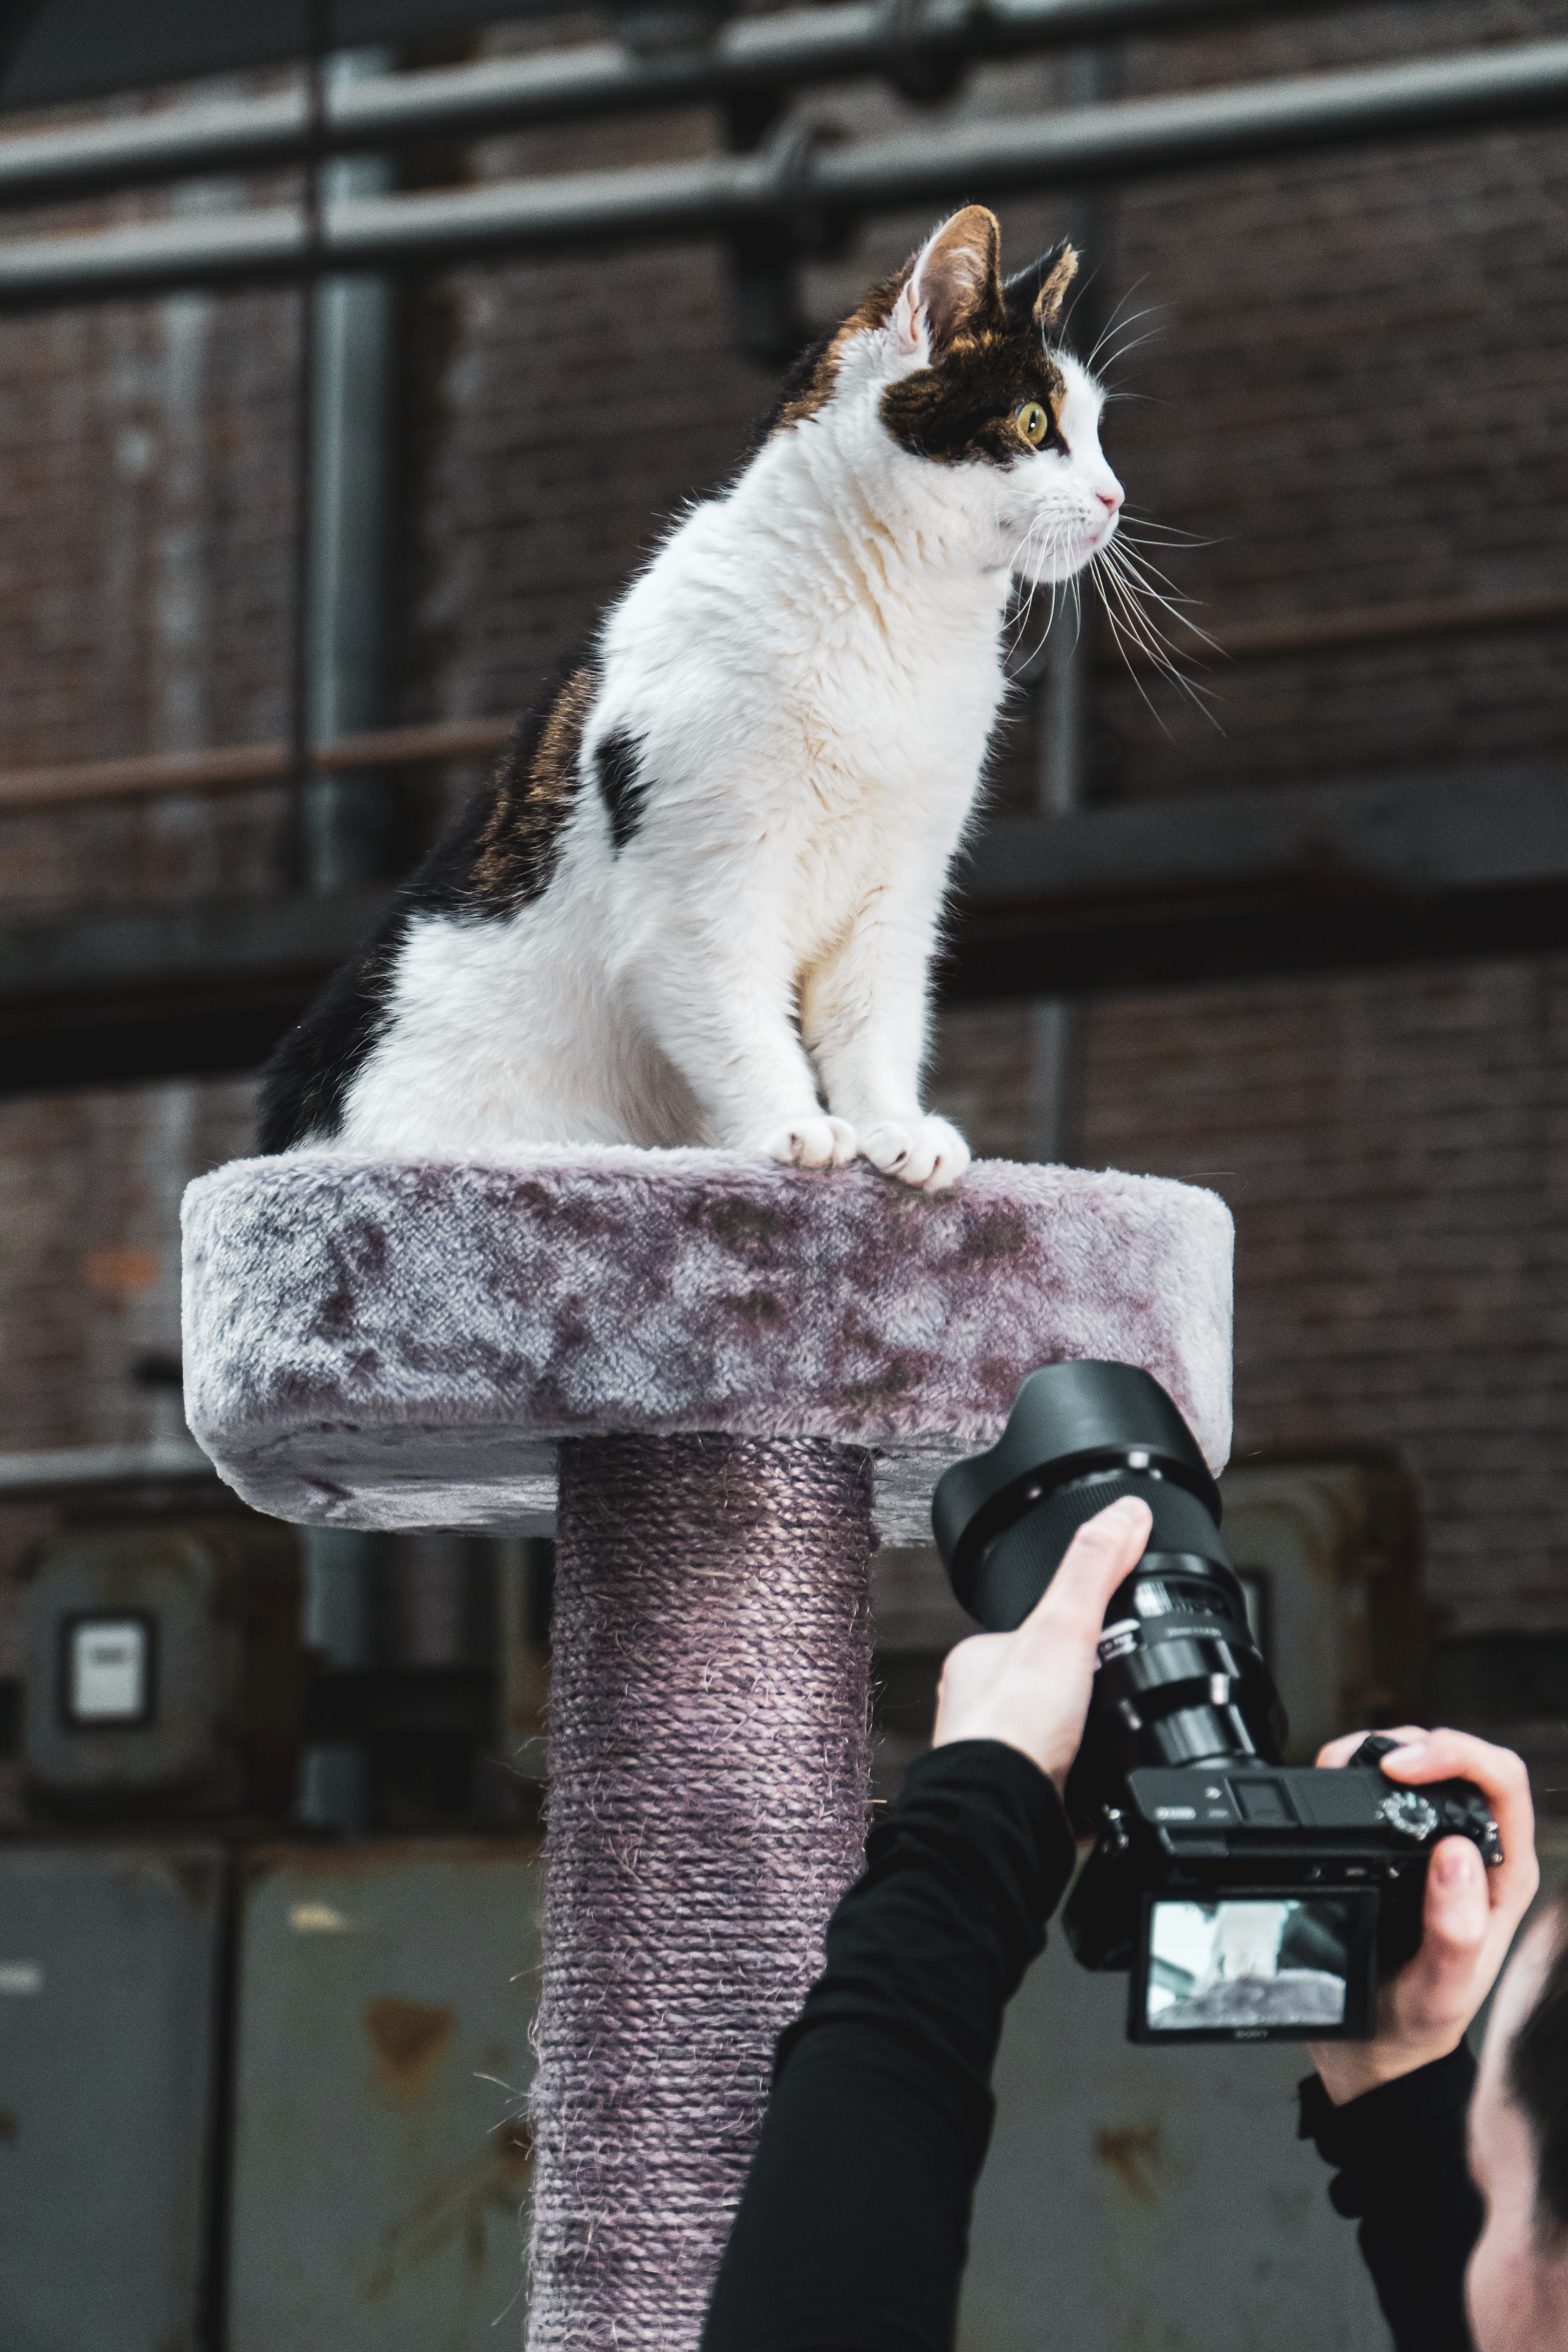 Cat on a cat tree with a camera pointed at her